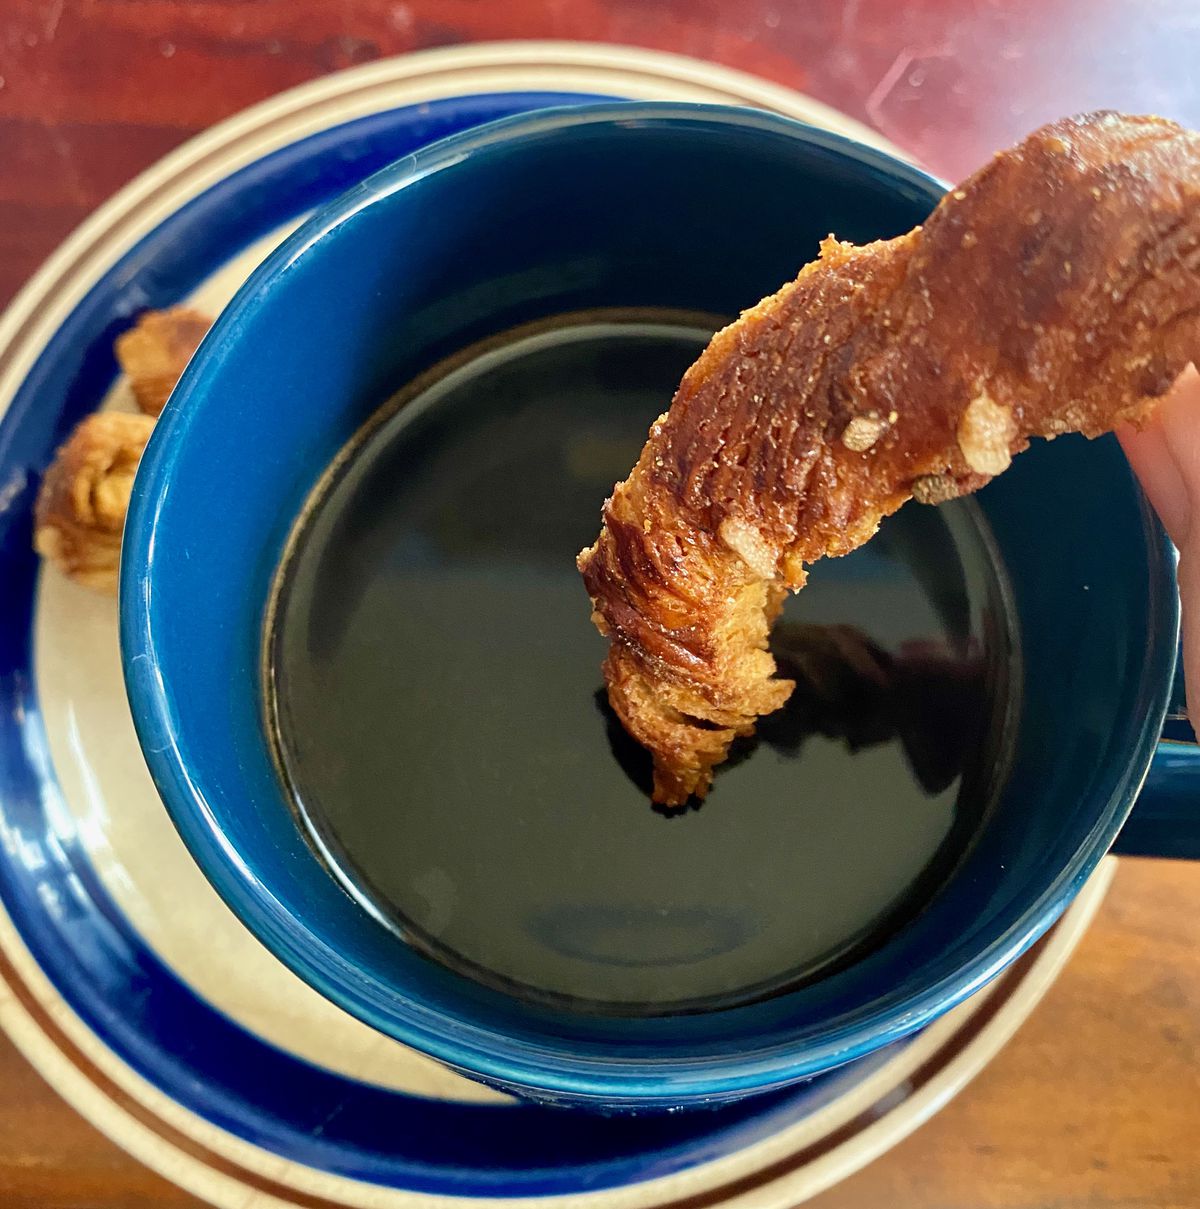 A brown pastry rests on top of the surface of a dark liquid inside a blue mug